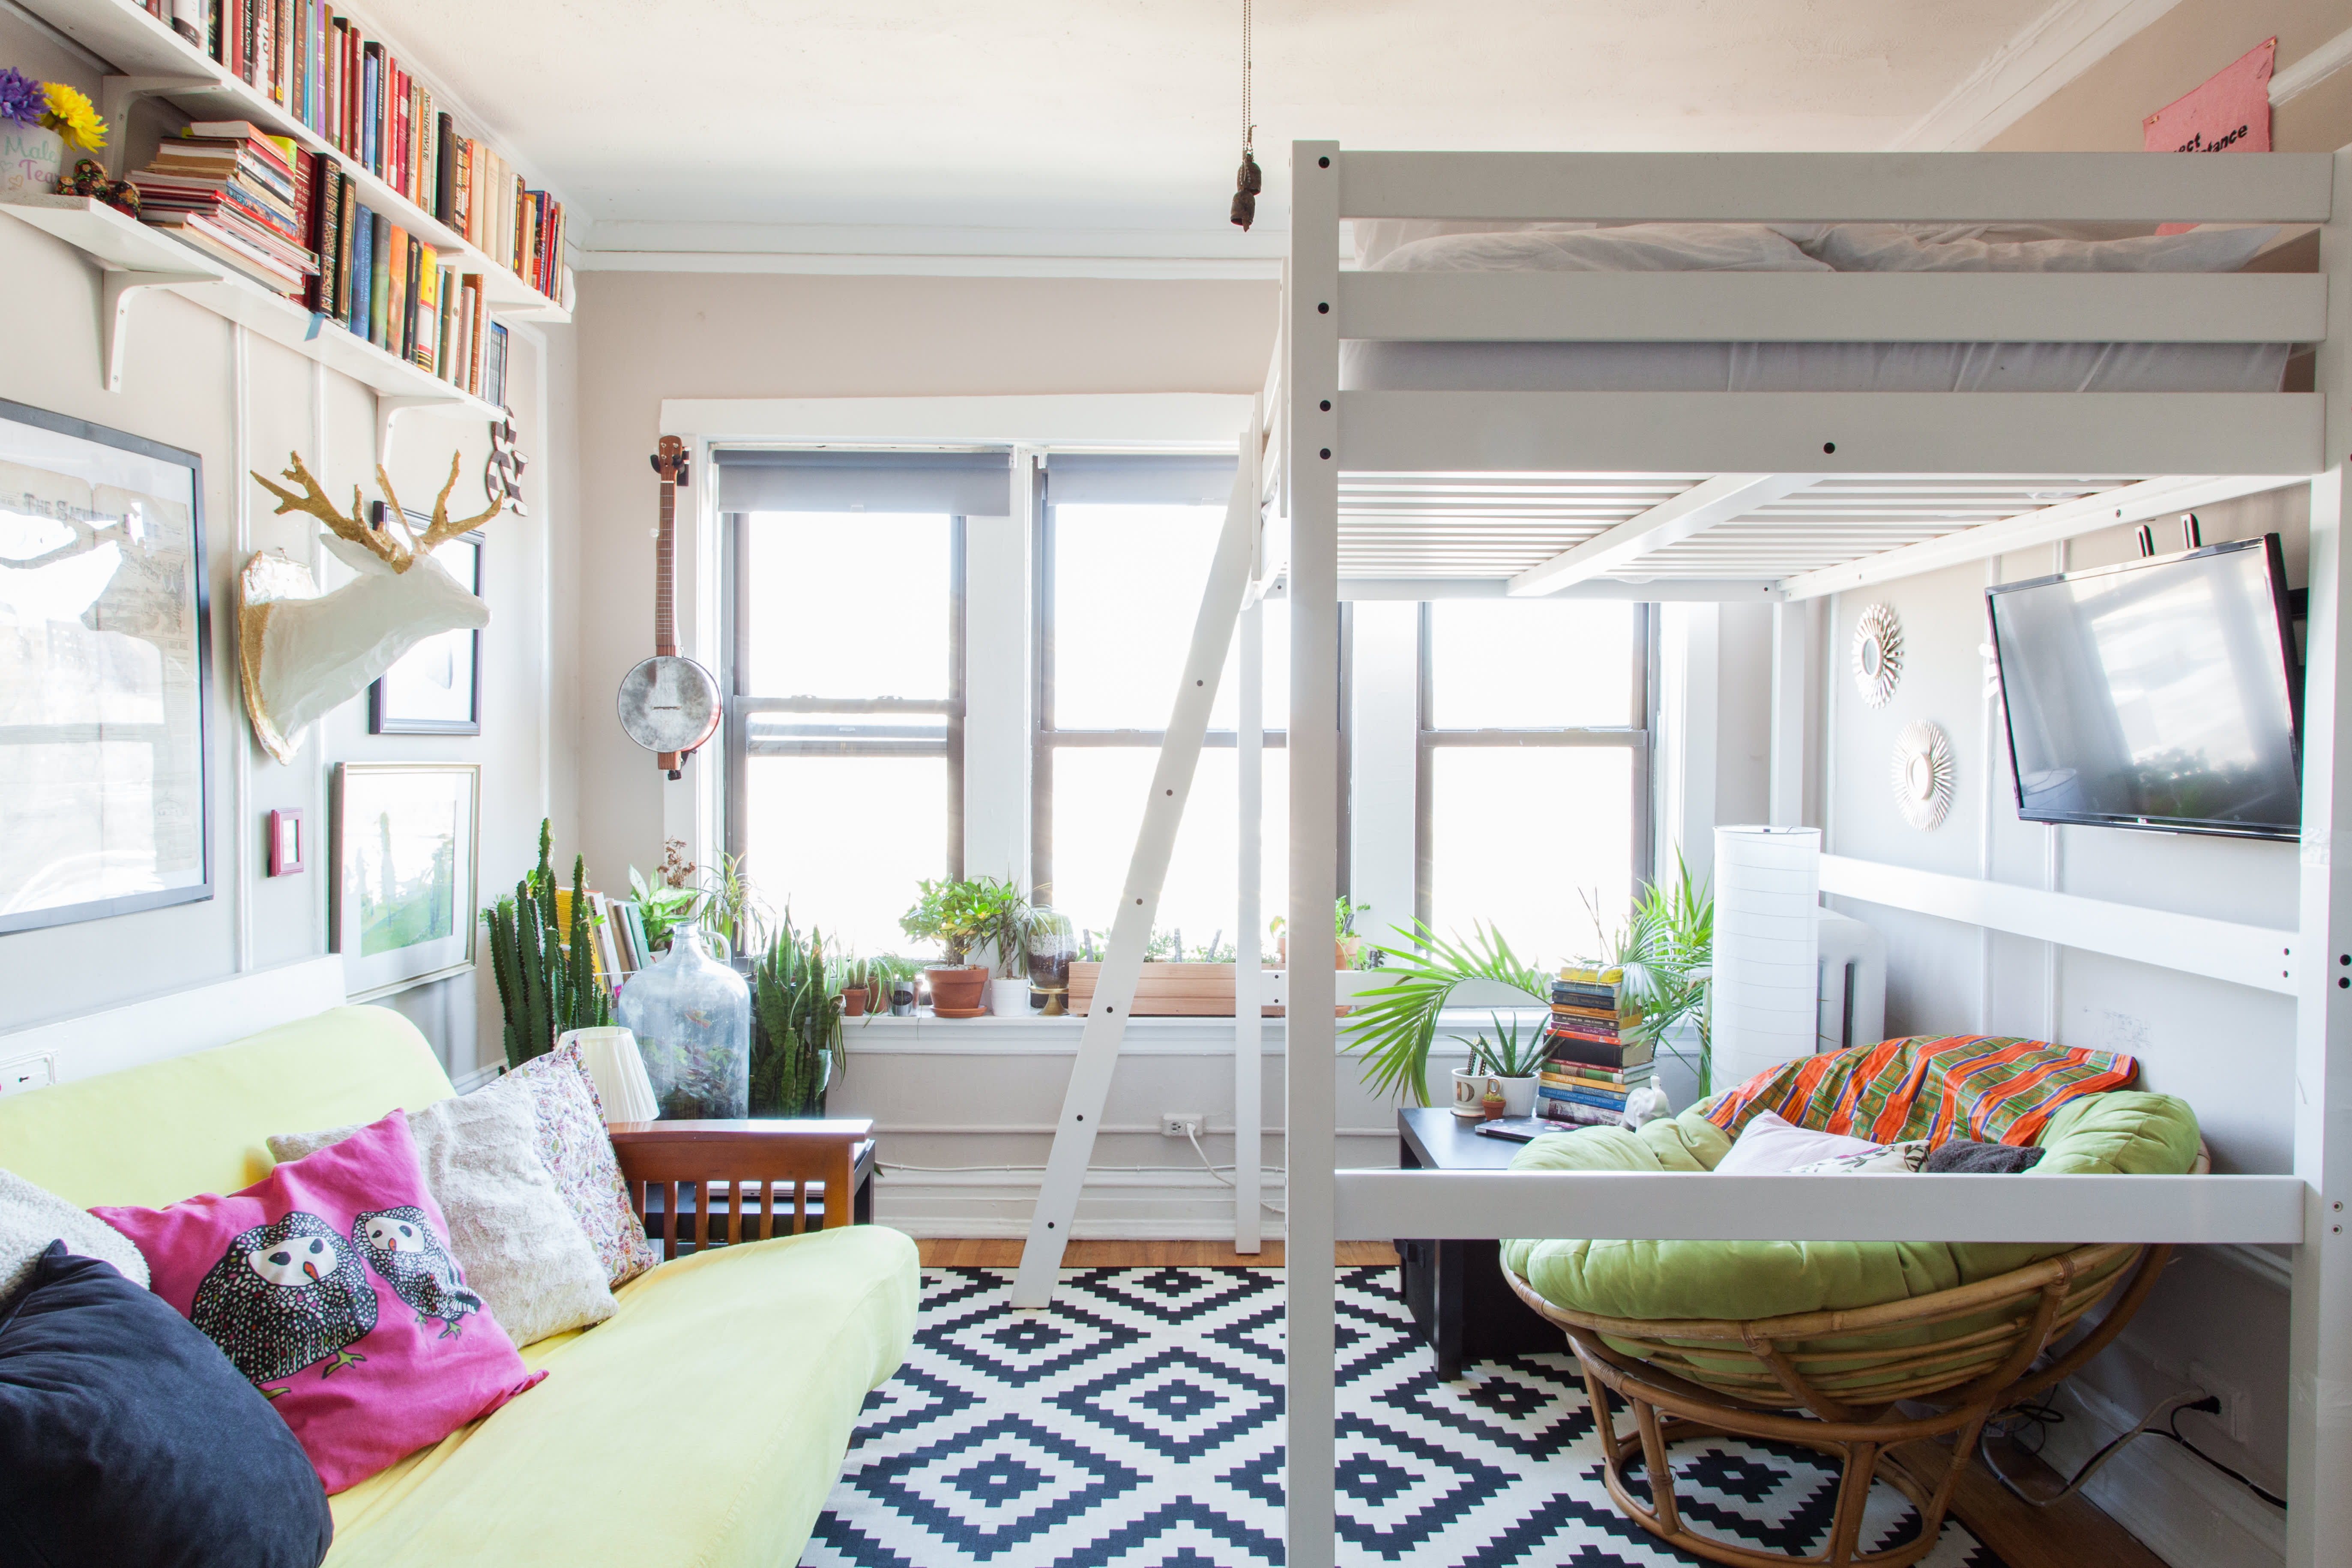 7 Small Space Interior Design Solutions To Try